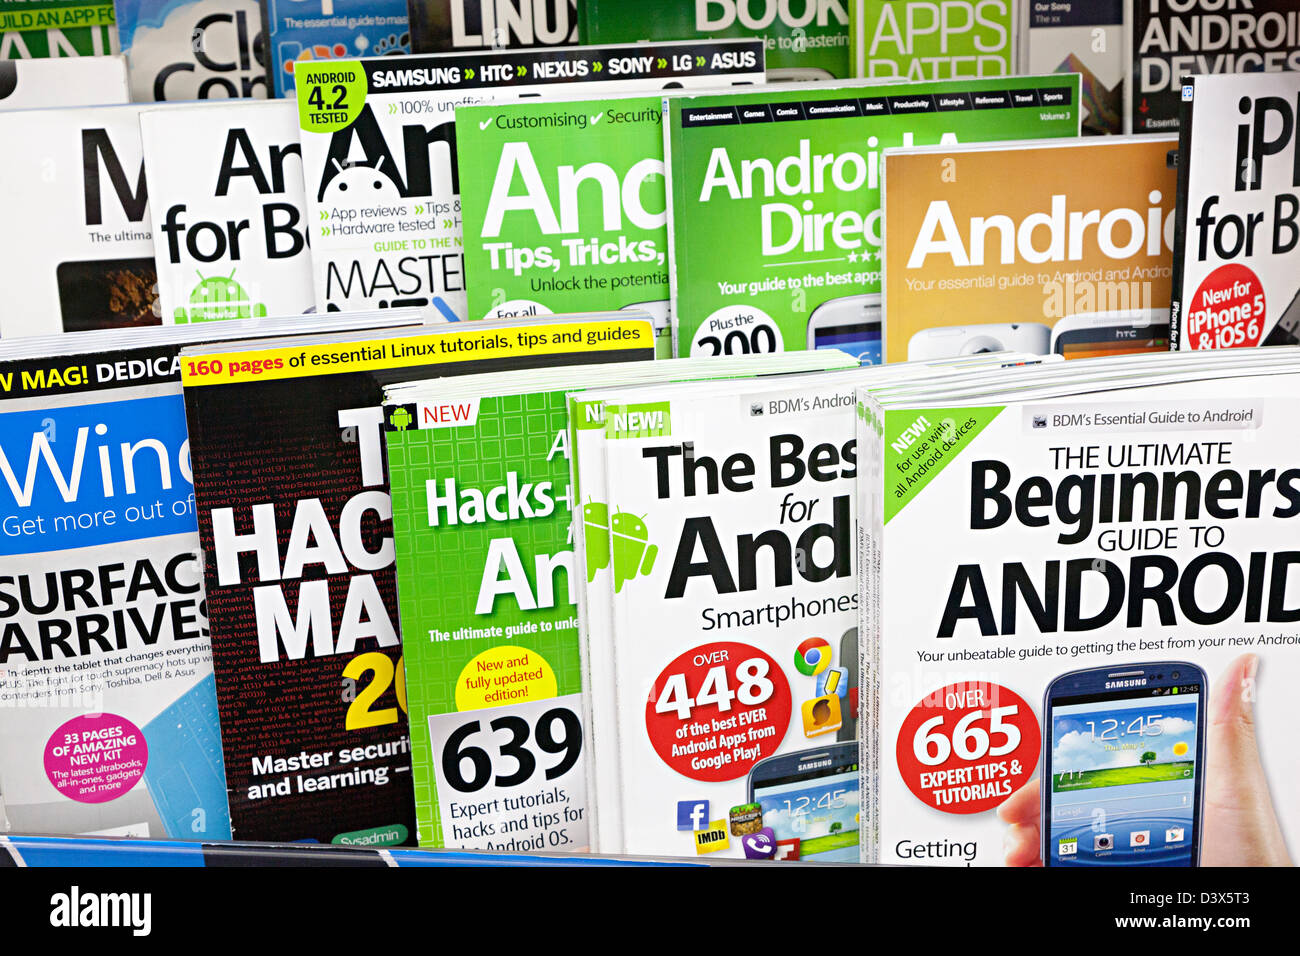 Computer and Android magazines on sale on news stand with dates not showing, UK Stock Photo